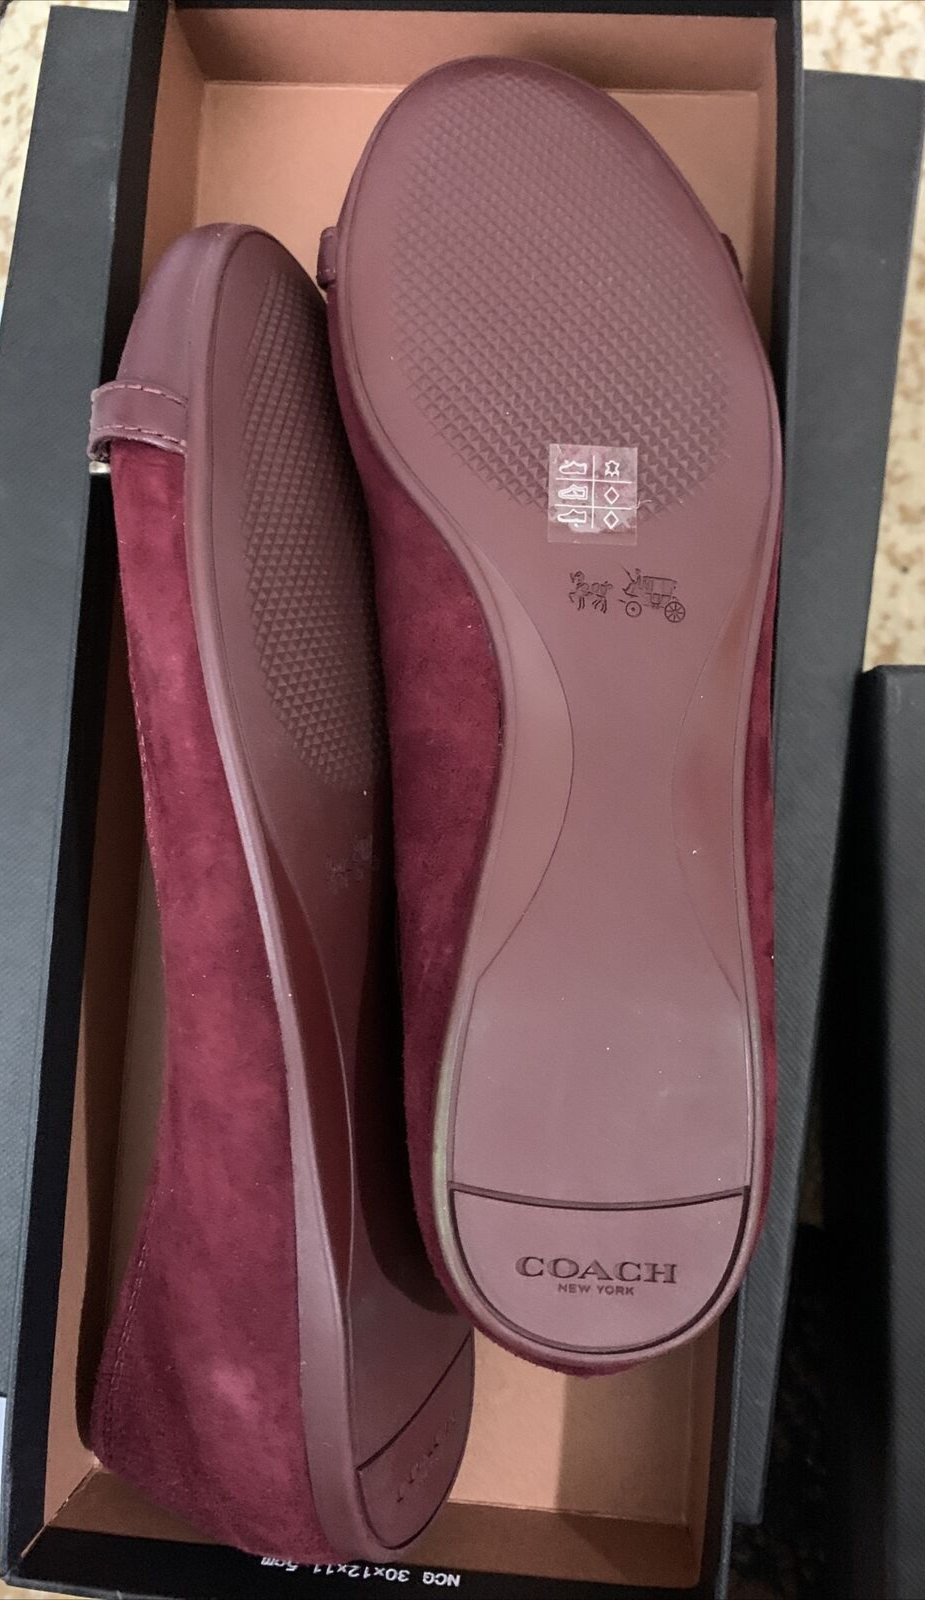 Primary image for Coach Leila WINE Flats Loafers NIB size 6.5US